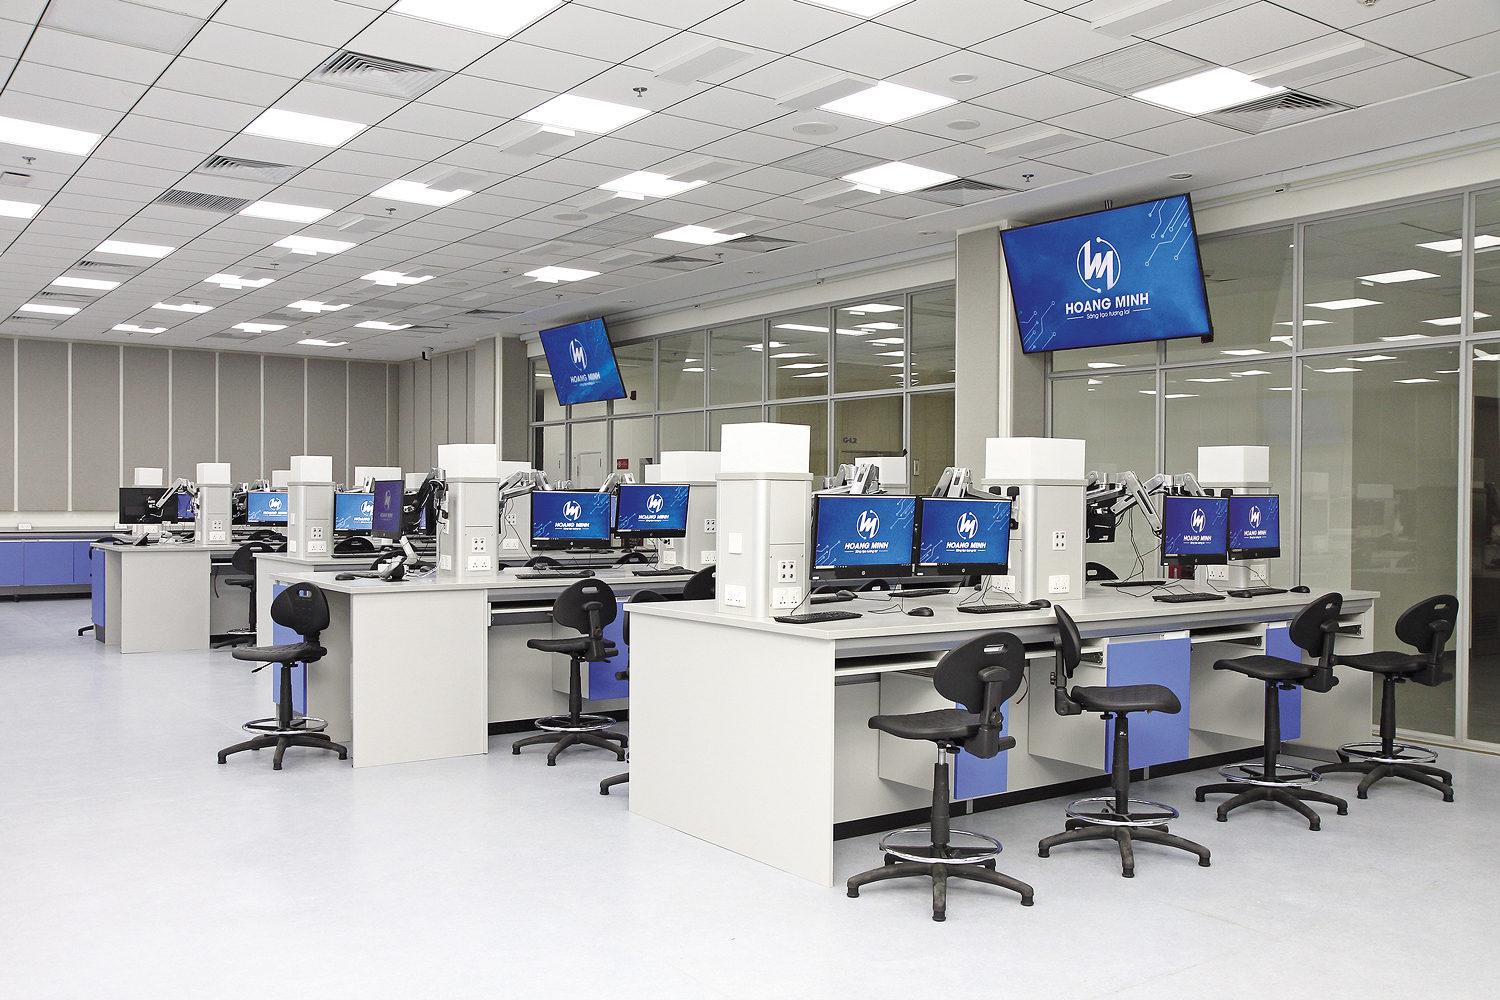 Each super lab is fully equipped with a powerful Extron AV switching system plus wired and wireless connectivity and a robust sound system..